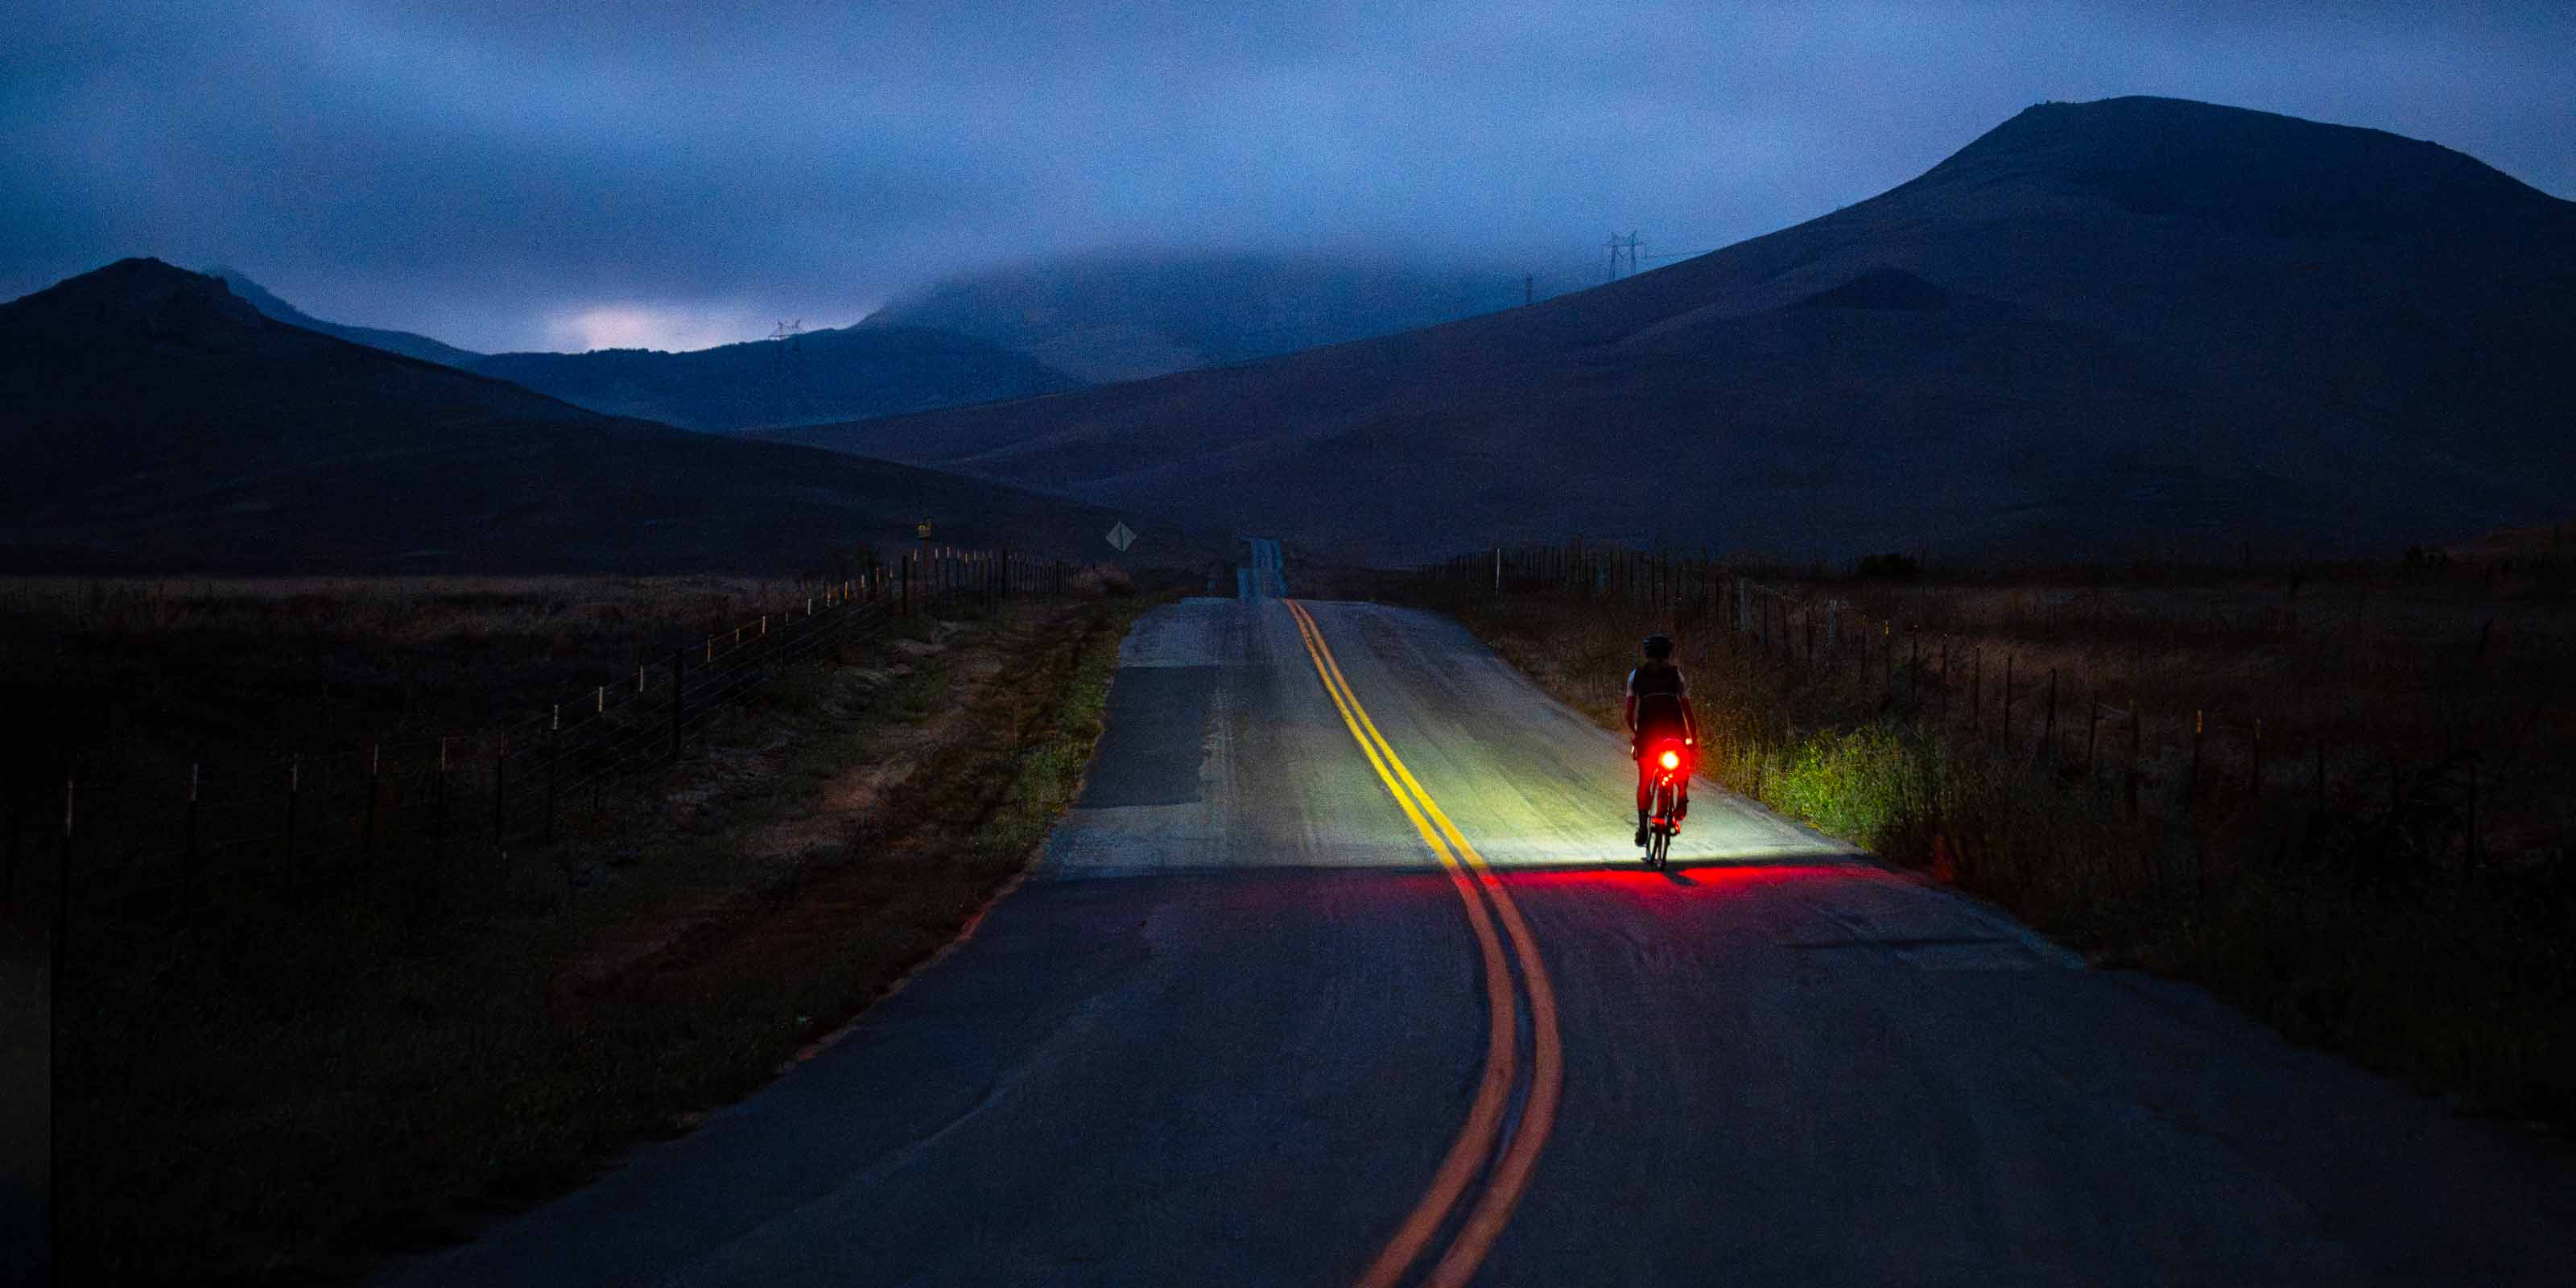 Cyclist on the road in the dark with front leading the way and bright taillight 